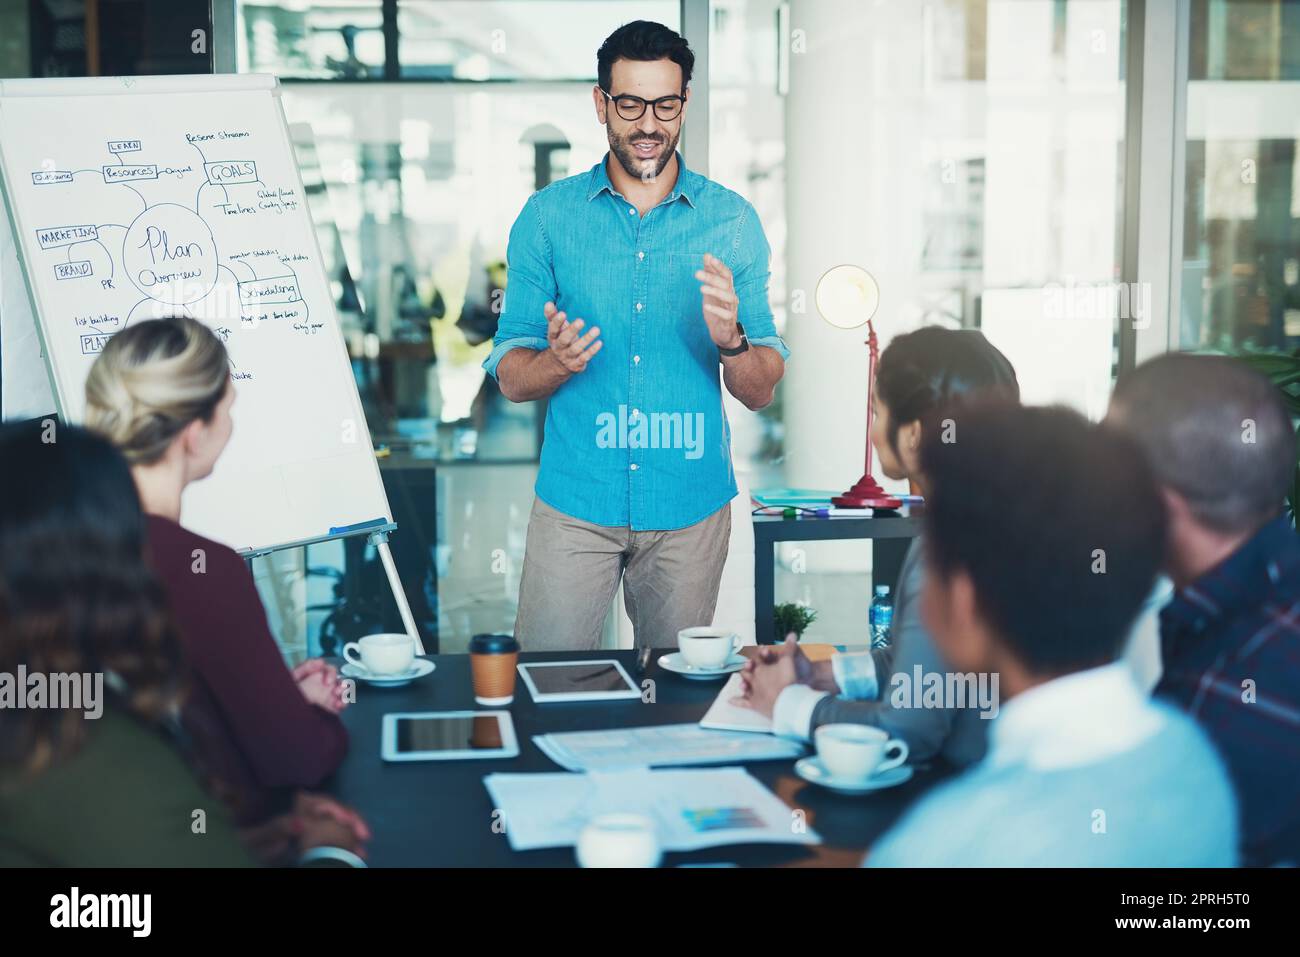 Presenting his ideas to the team. a young businessman giving a presentation. Stock Photo